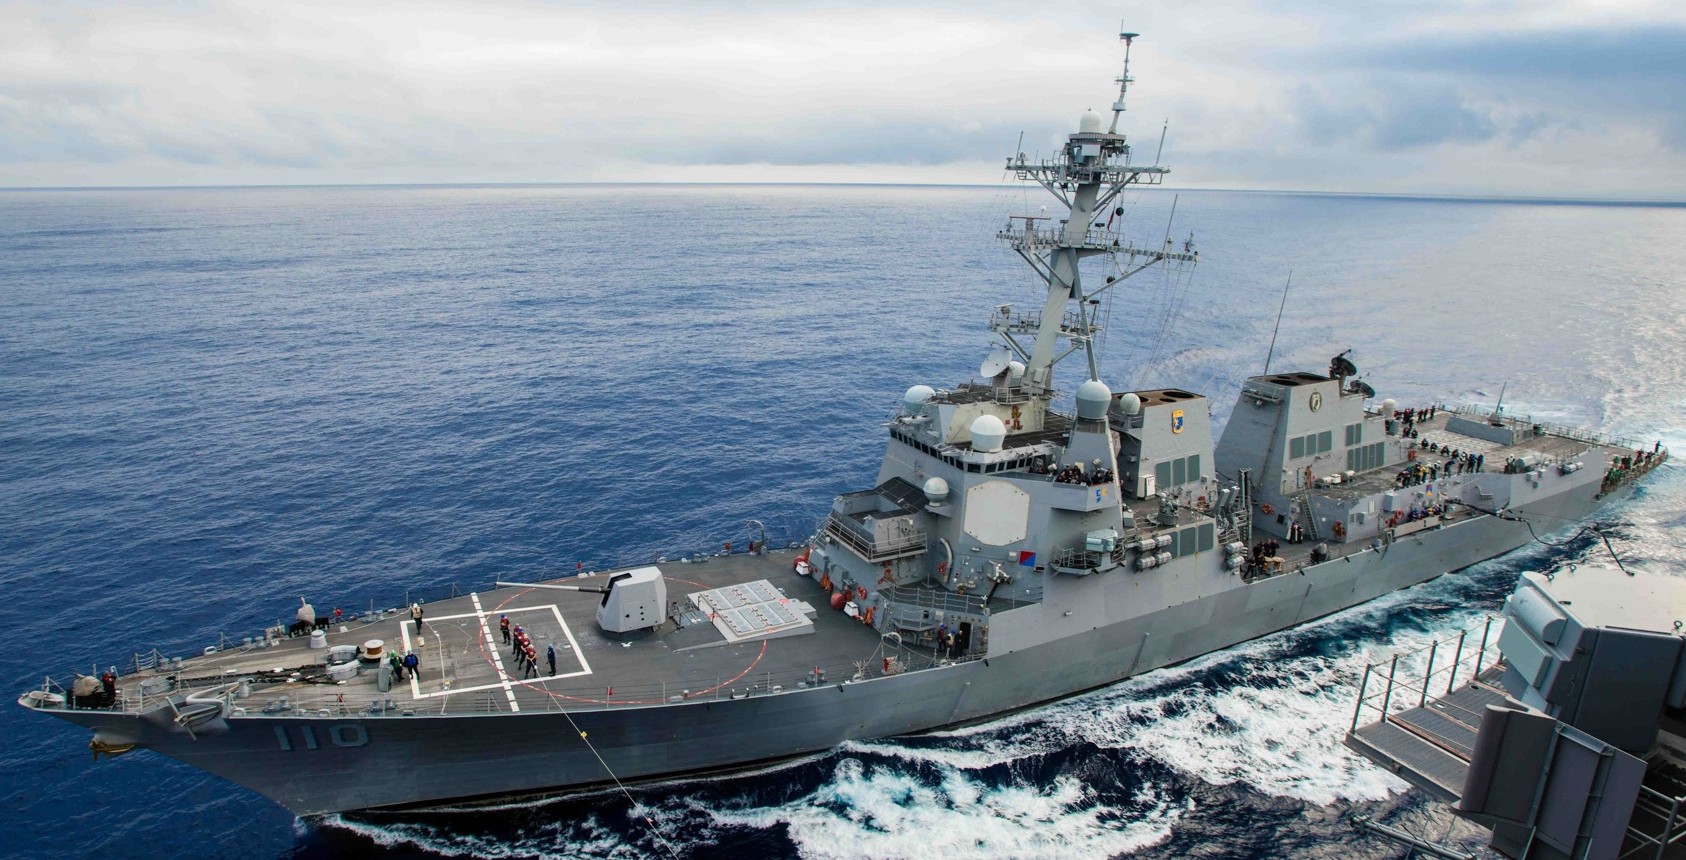 ddg-110 uss william p. lawrence arleigh burke class guided missile destroyer aegis us navy 12